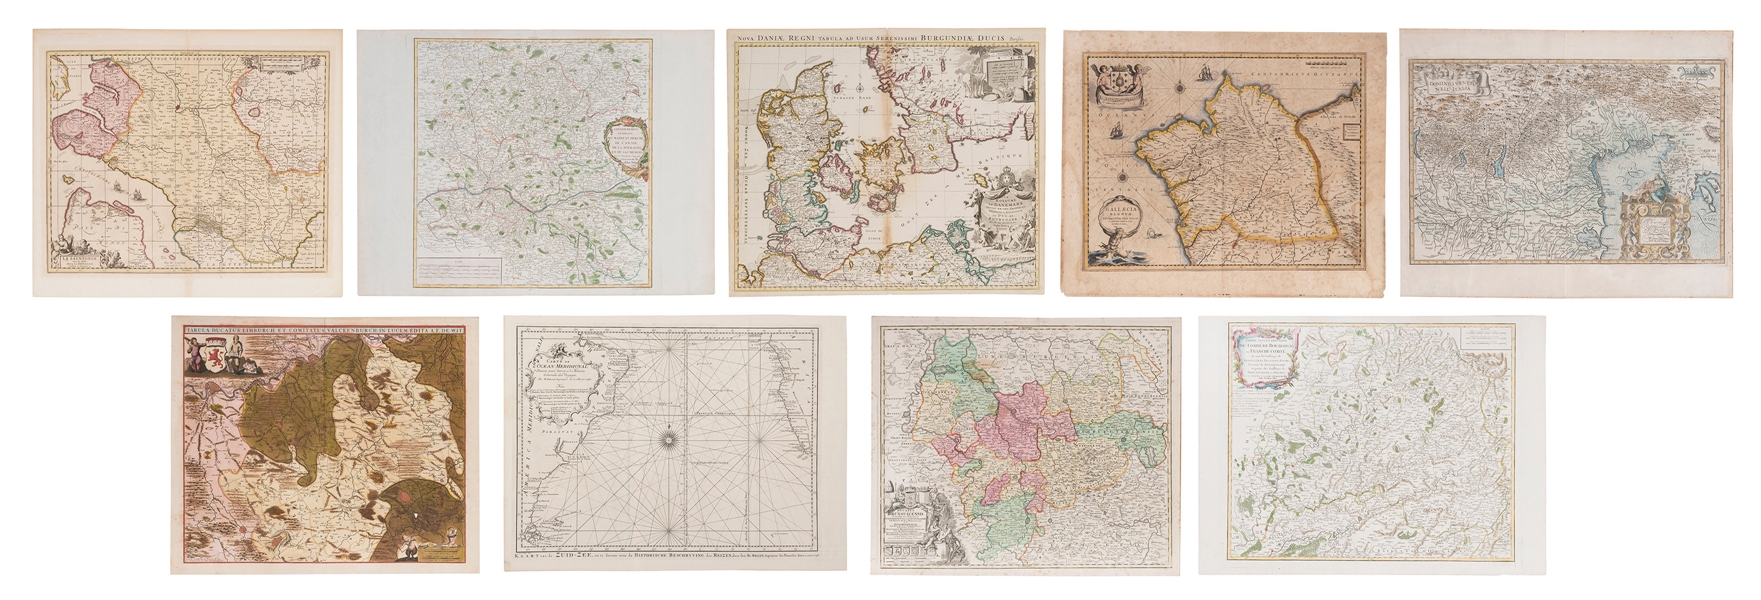  [CARTOGRAPHY]. A group of 9 engraved maps, including: MAGIN...